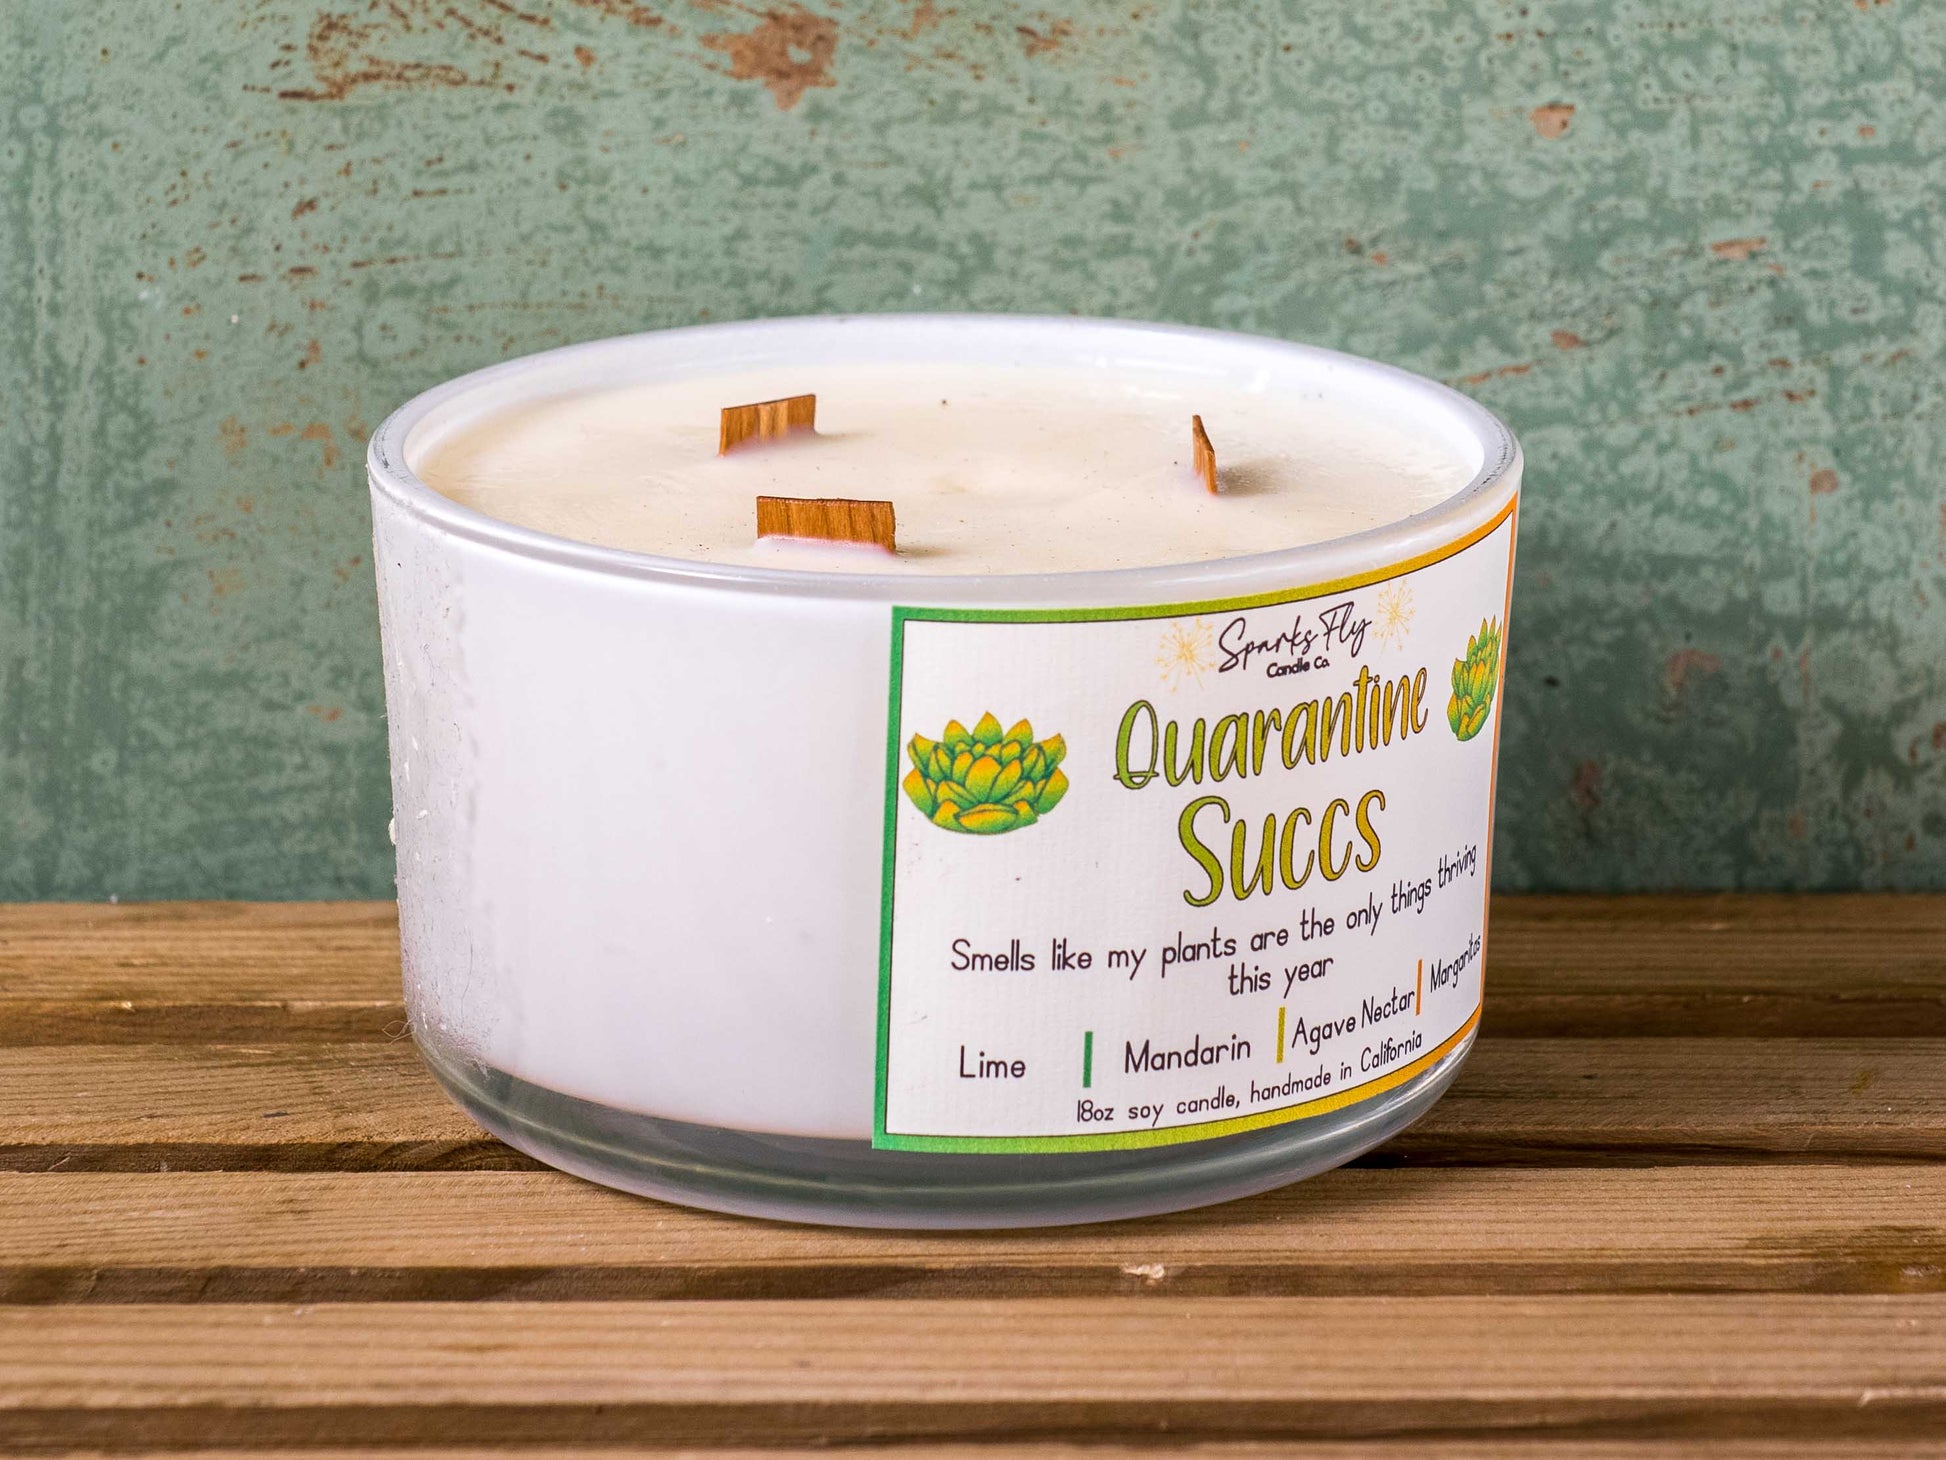 Quarantine Succs Candle - A nod to thriving plants amidst a year of staying in.